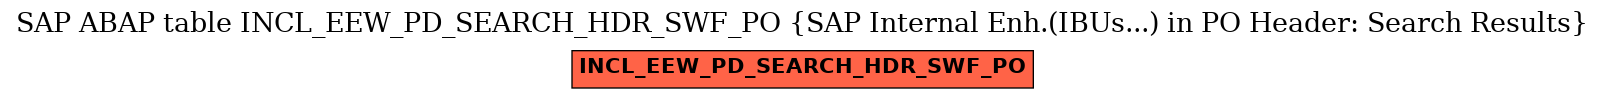 E-R Diagram for table INCL_EEW_PD_SEARCH_HDR_SWF_PO (SAP Internal Enh.(IBUs...) in PO Header: Search Results)